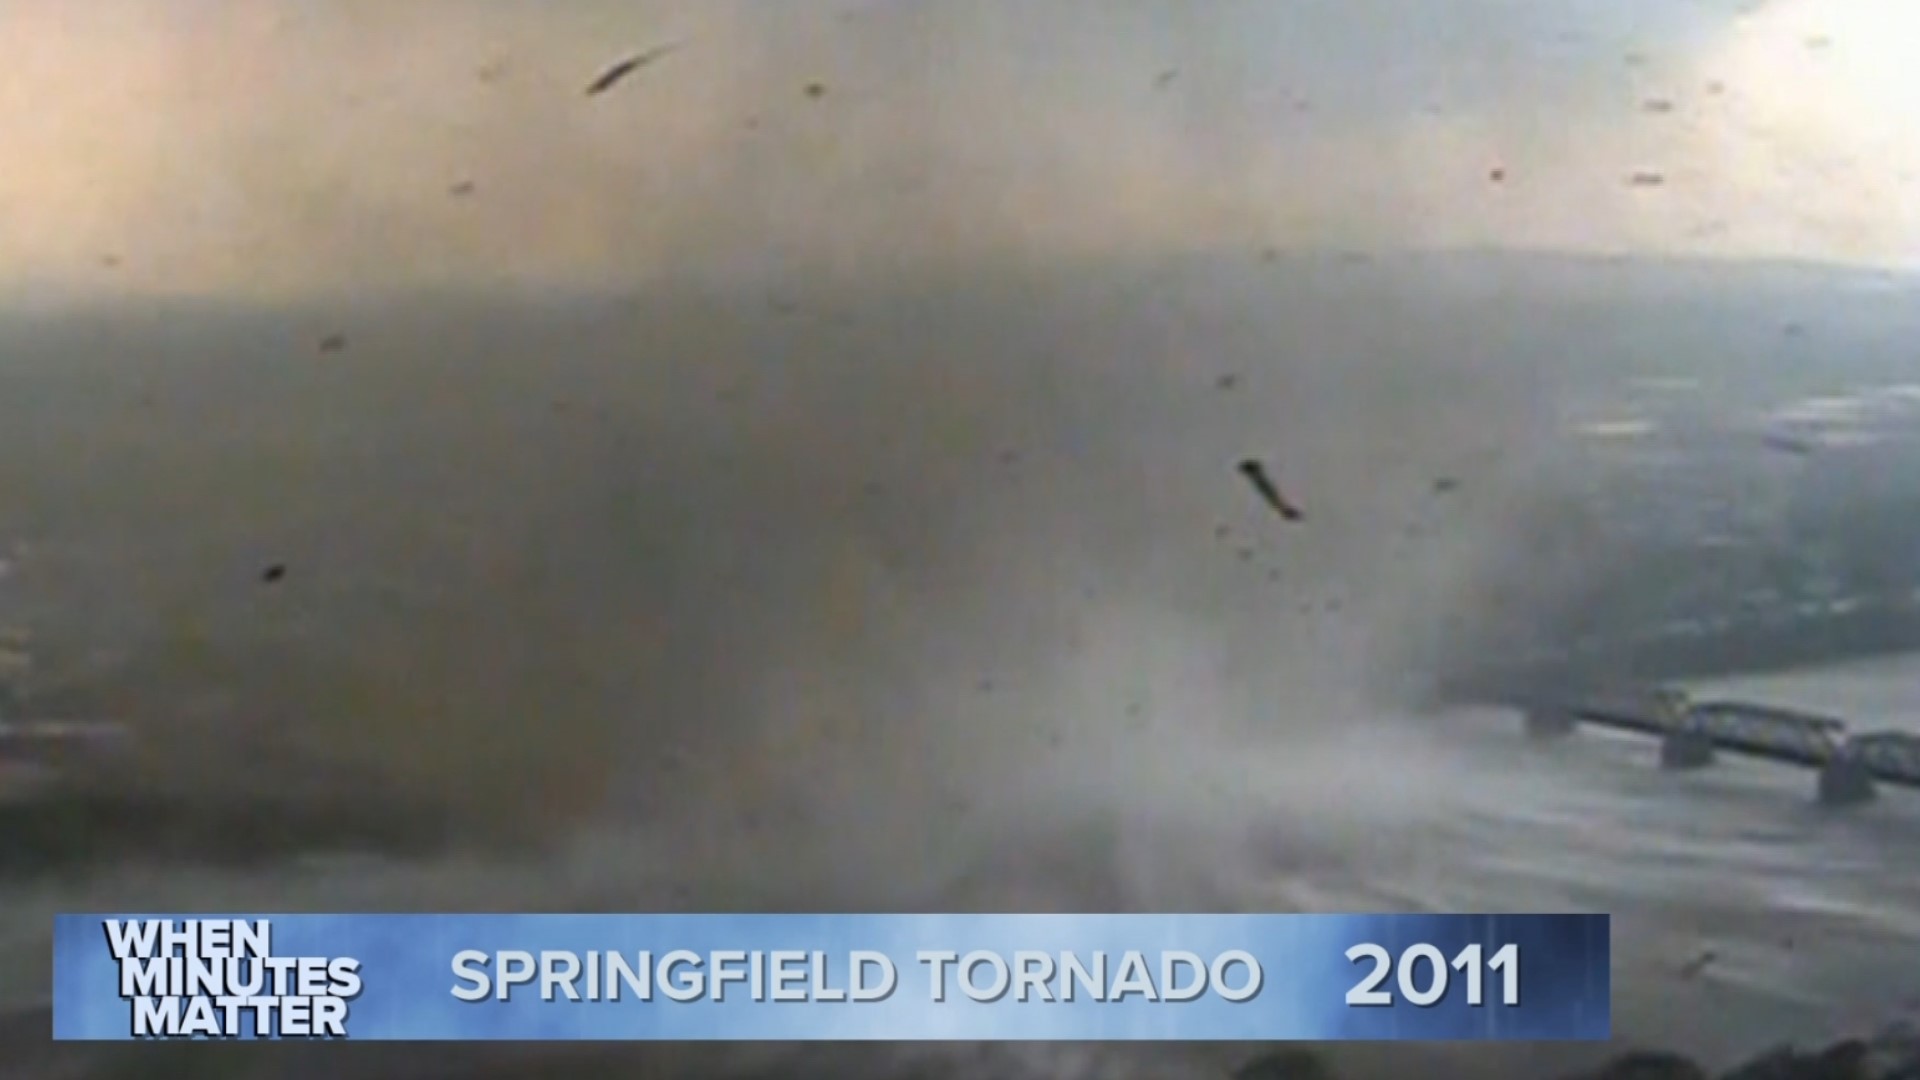 On June 1, 2011, a tornado touched down in Connecticut, starting right over the Connecticut River and moving into the southern section of downtown Springfield, Mass.